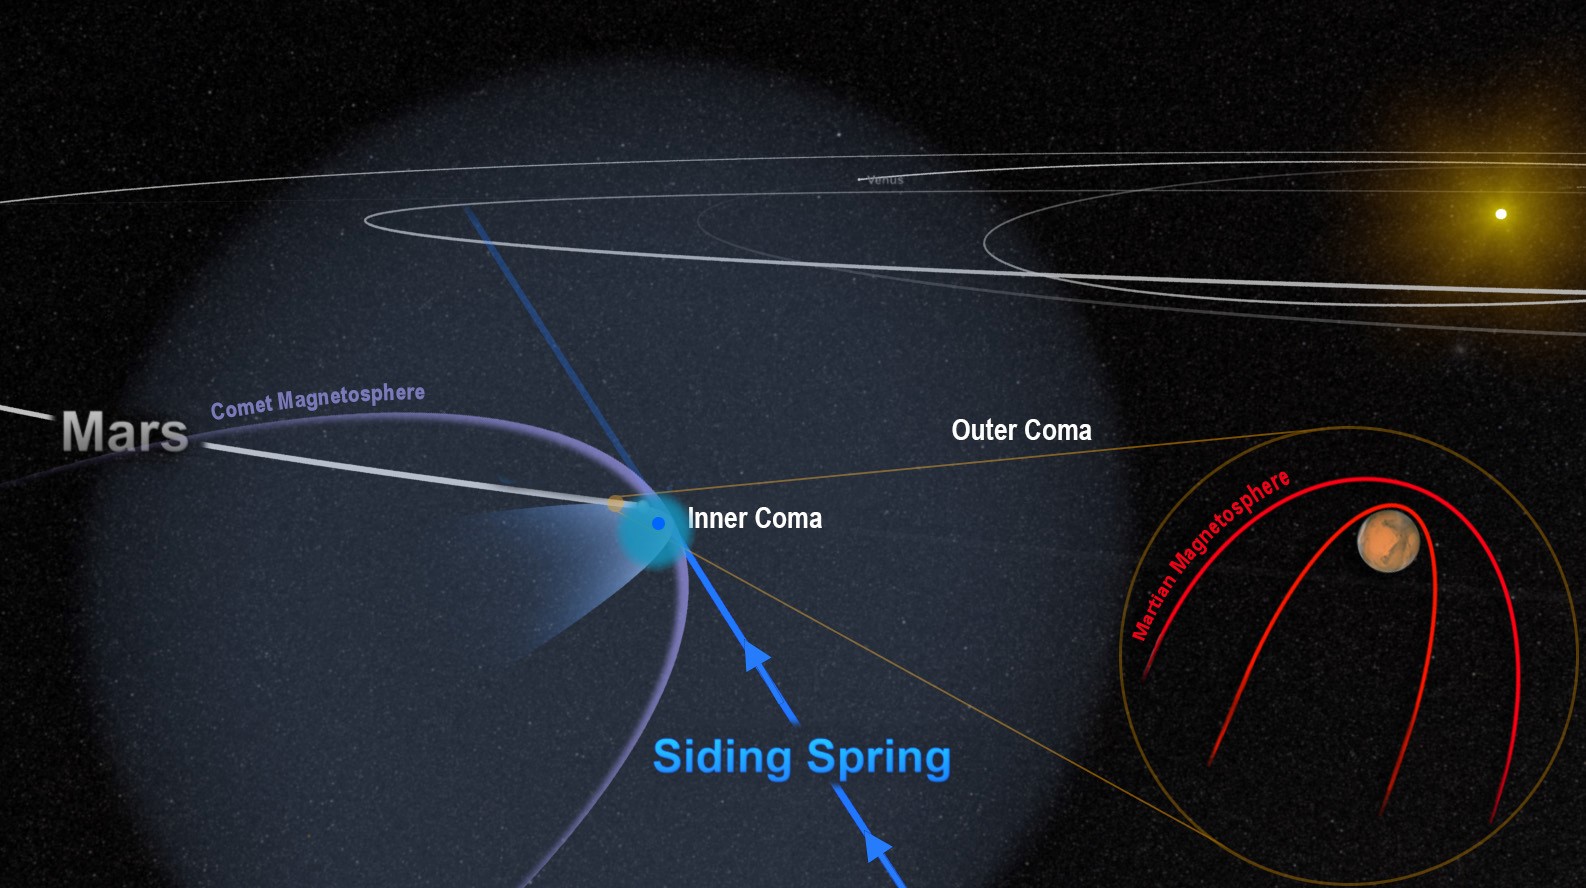 The close encounter between comet Siding Spring and Mars flooded the planet with an invisible tide of charged particles from the comet's coma. The dense inner coma reached the surface of the planet, or nearly so. The comet's powerful magnetic field temporarily merged with, and overwhelmed, the planet's weak field, as shown in this artist's depiction.